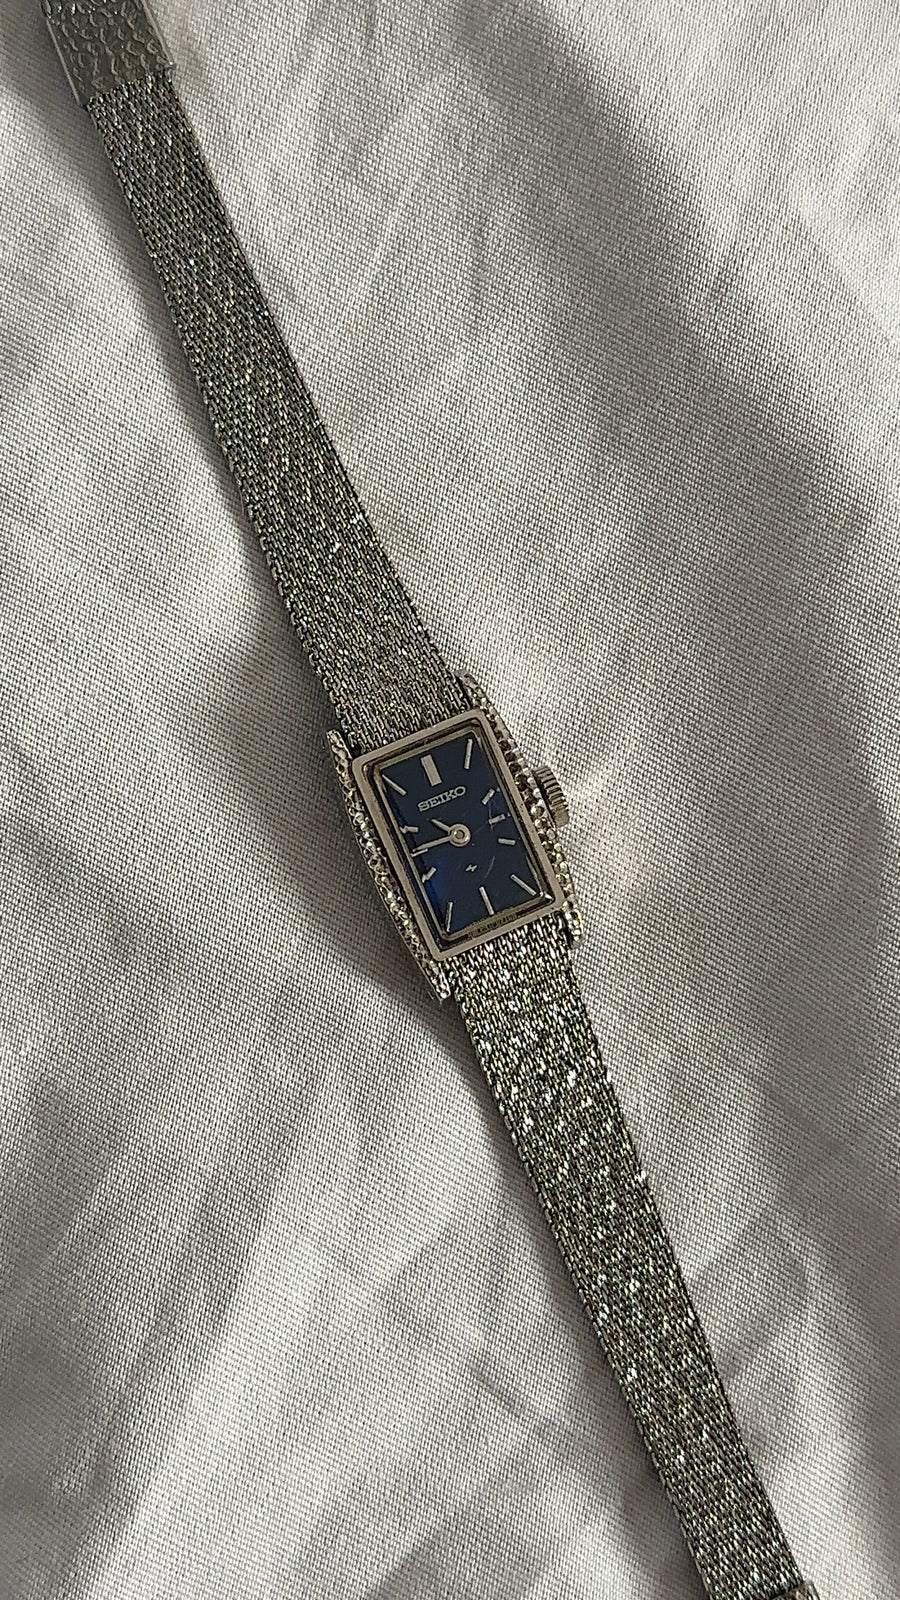 WORKING SILVER-TONE SEIKO CLASP WATCH WITH A BLUE DIAL